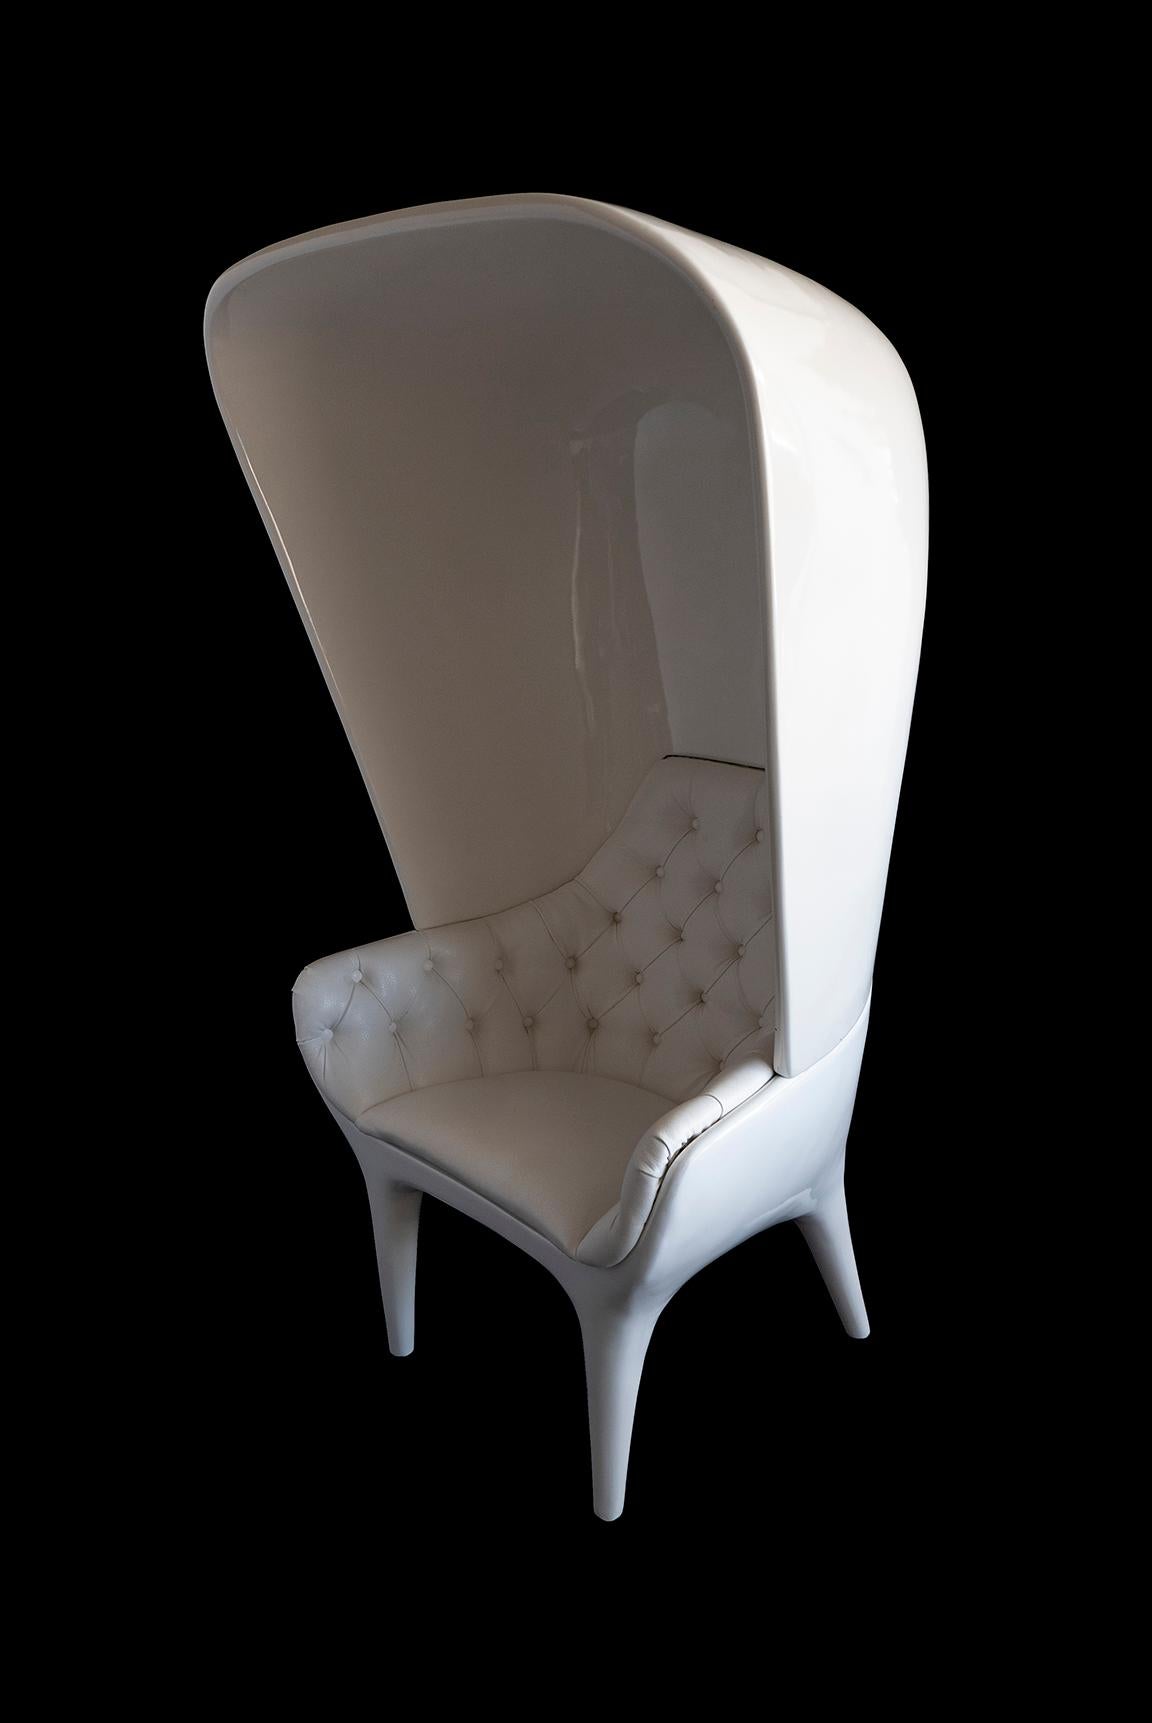 Original poltrona showtime Jaime Hayon chair. Made in Barcelona. 2006. Lacquered polyethylene and leather.